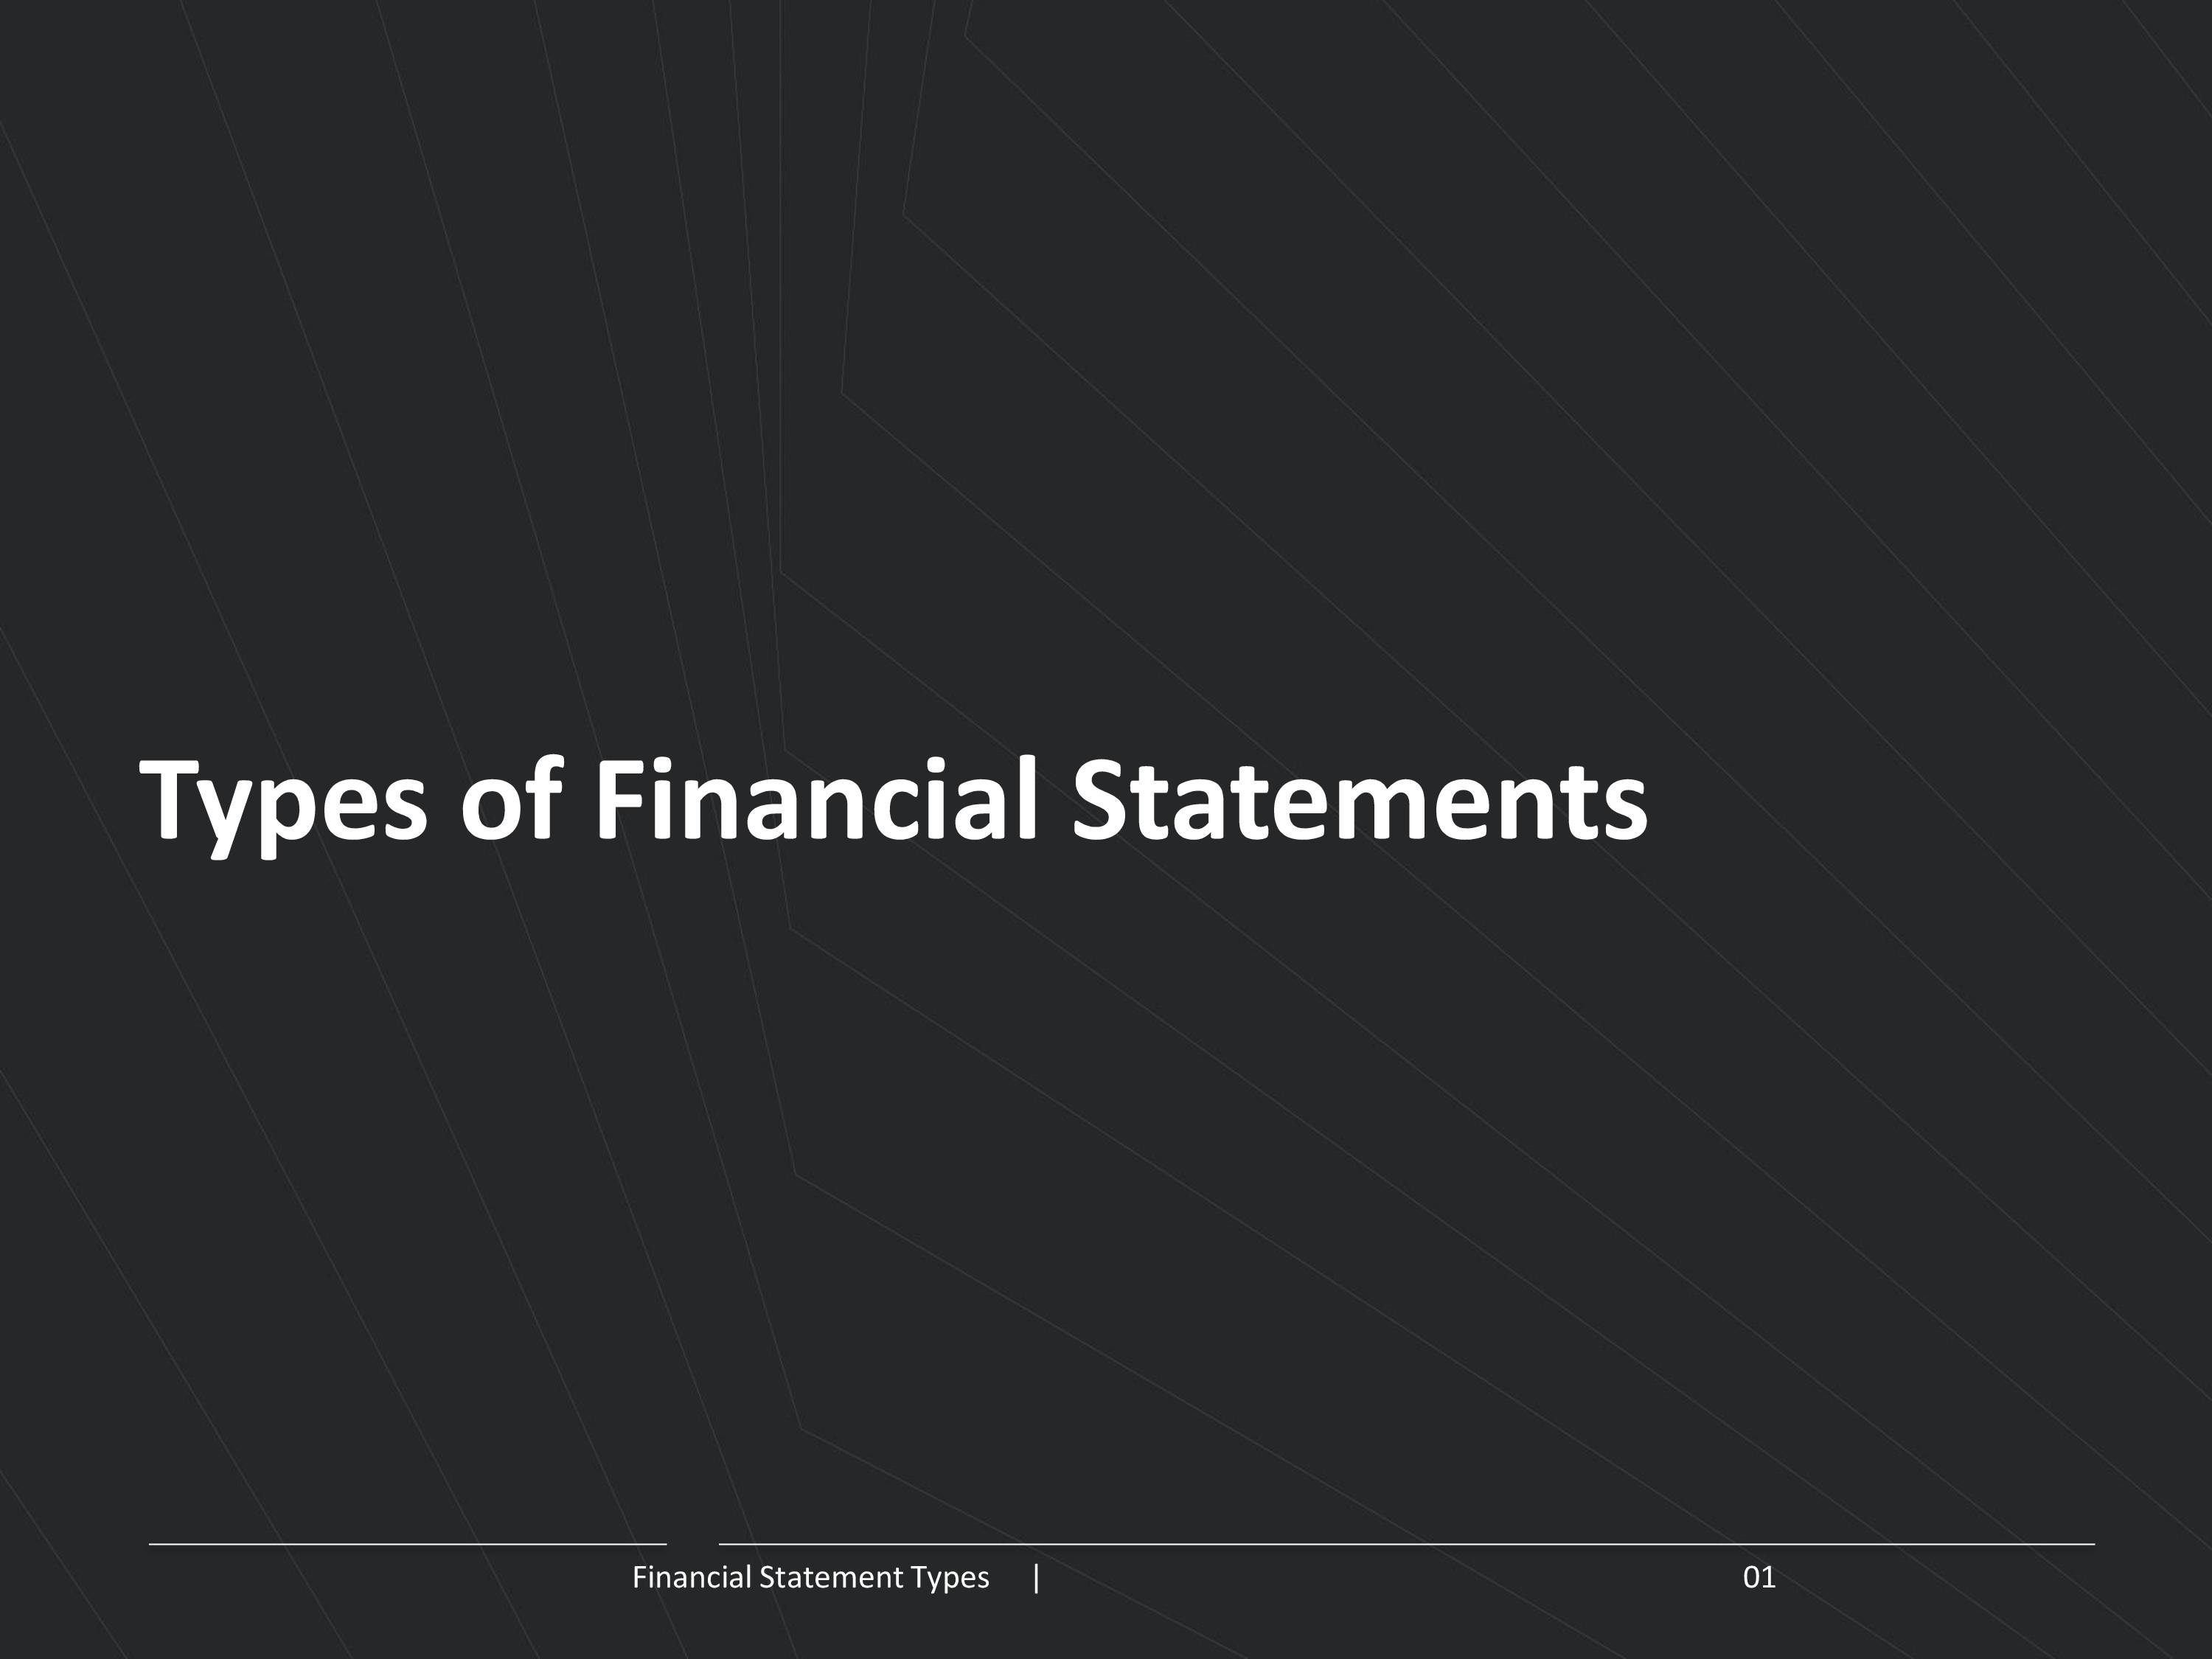 Presentation on Types of Financial Statements